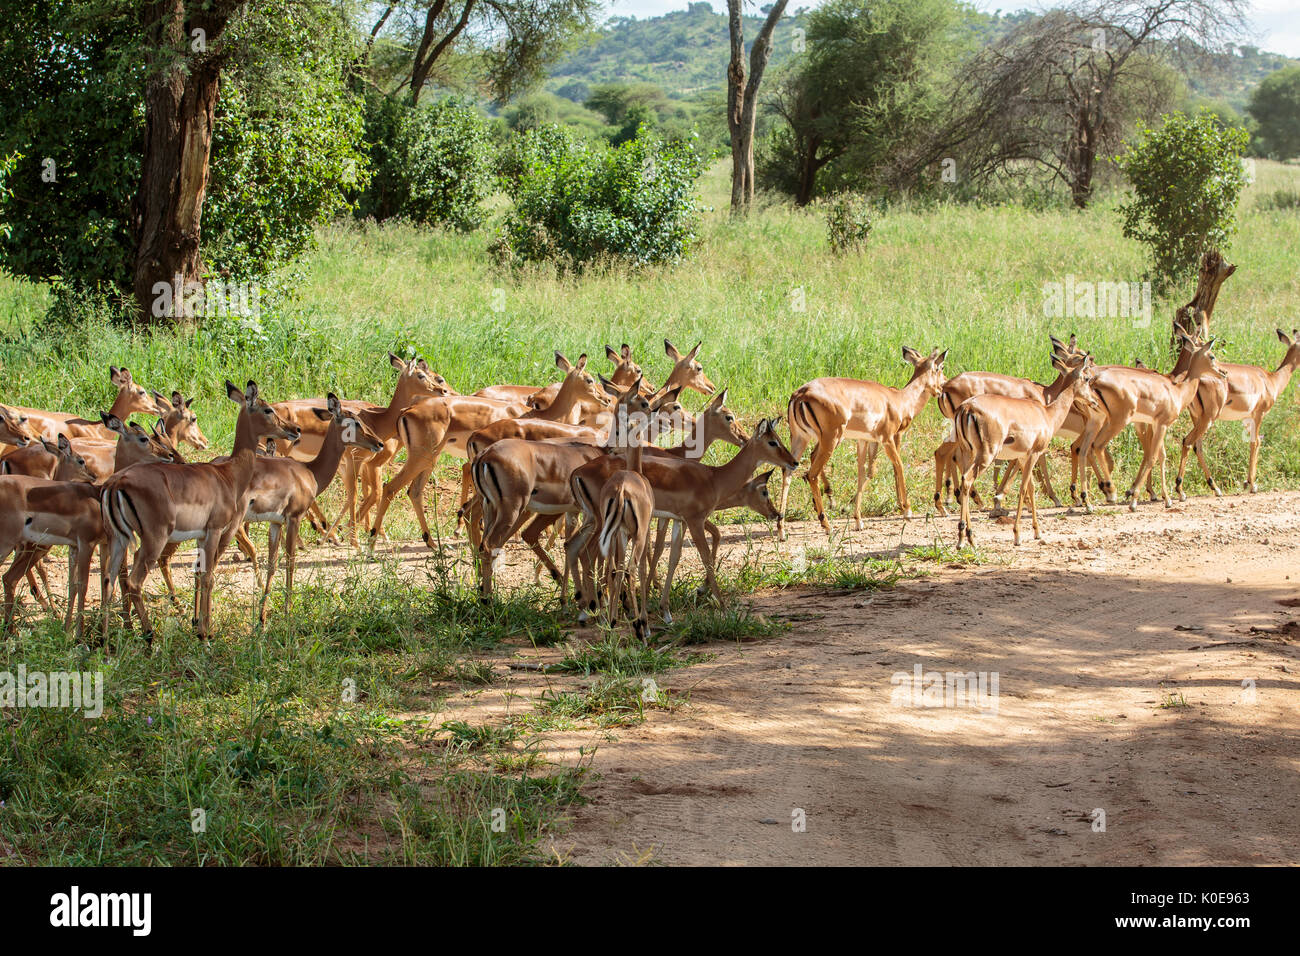 The impala is a medium-sized antelope found in eastern and southern Africa. Stock Photo